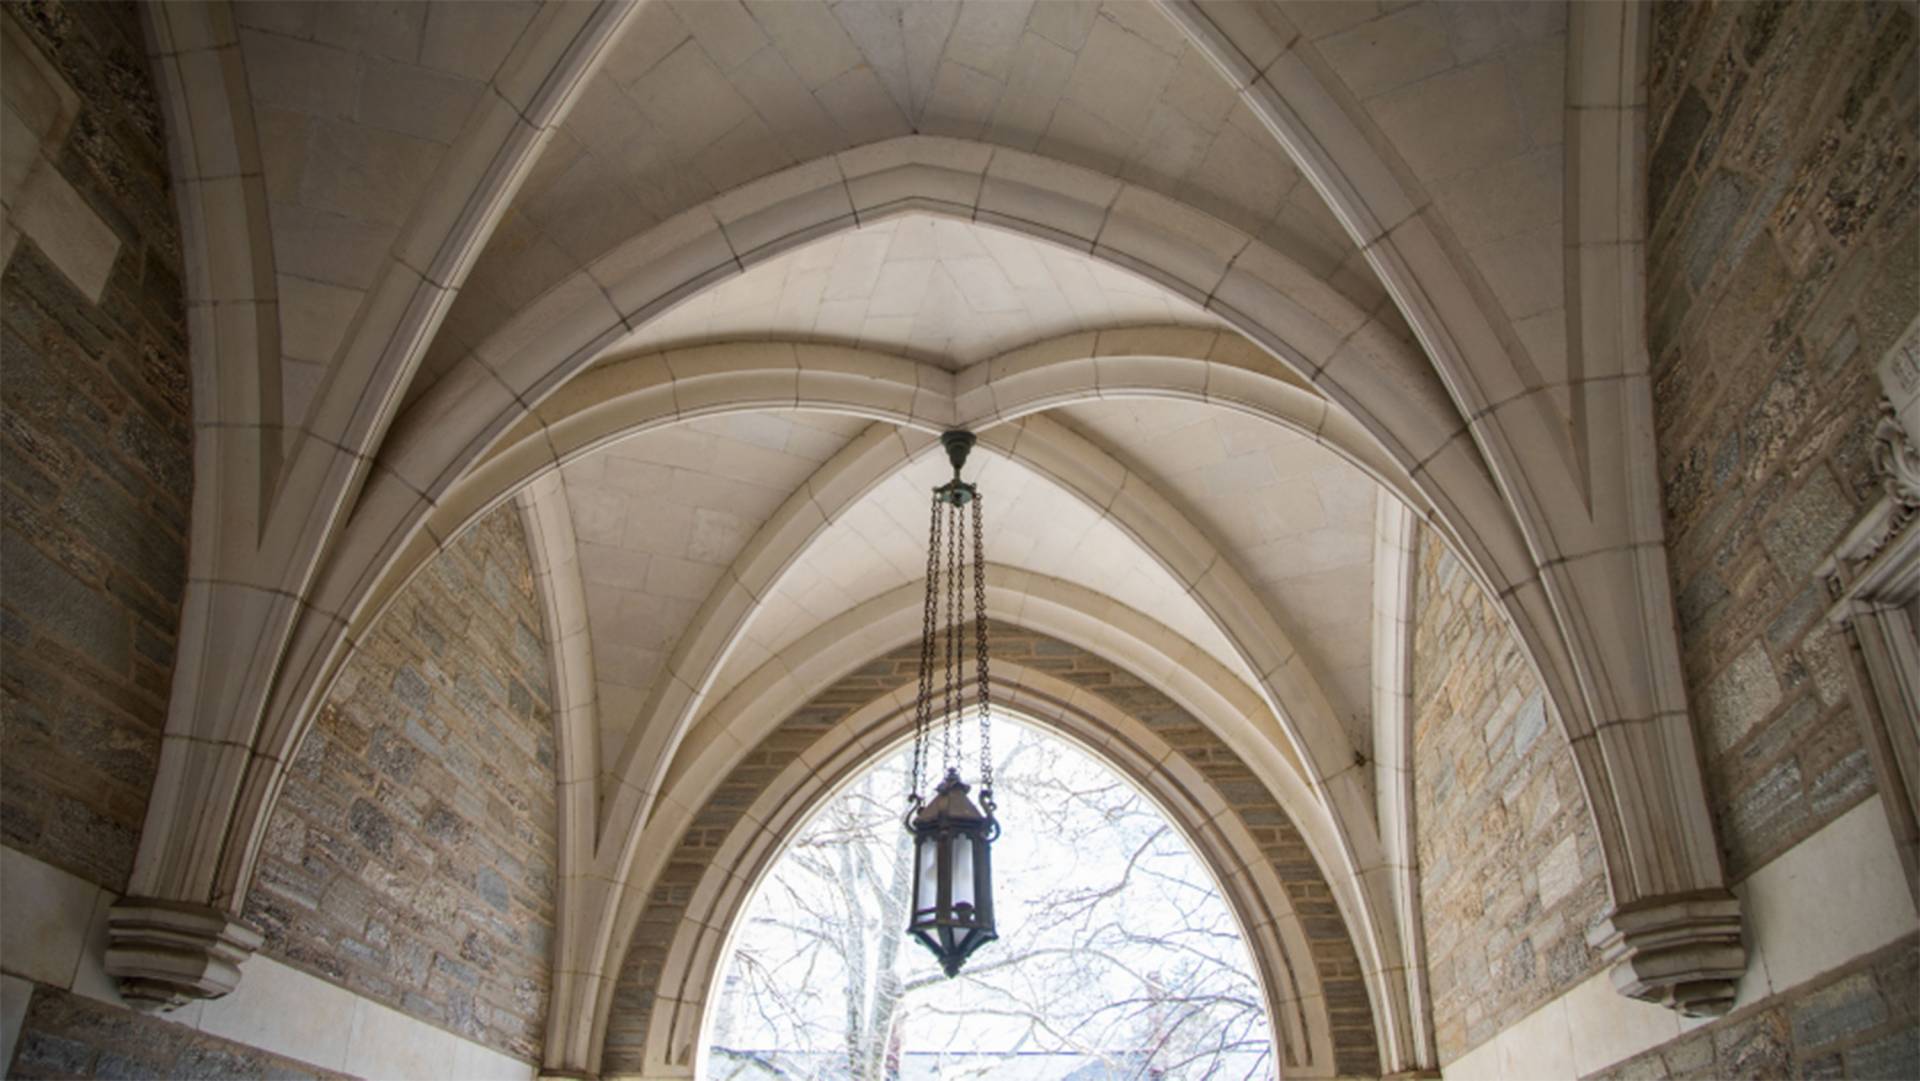 Archway with pendant lantern